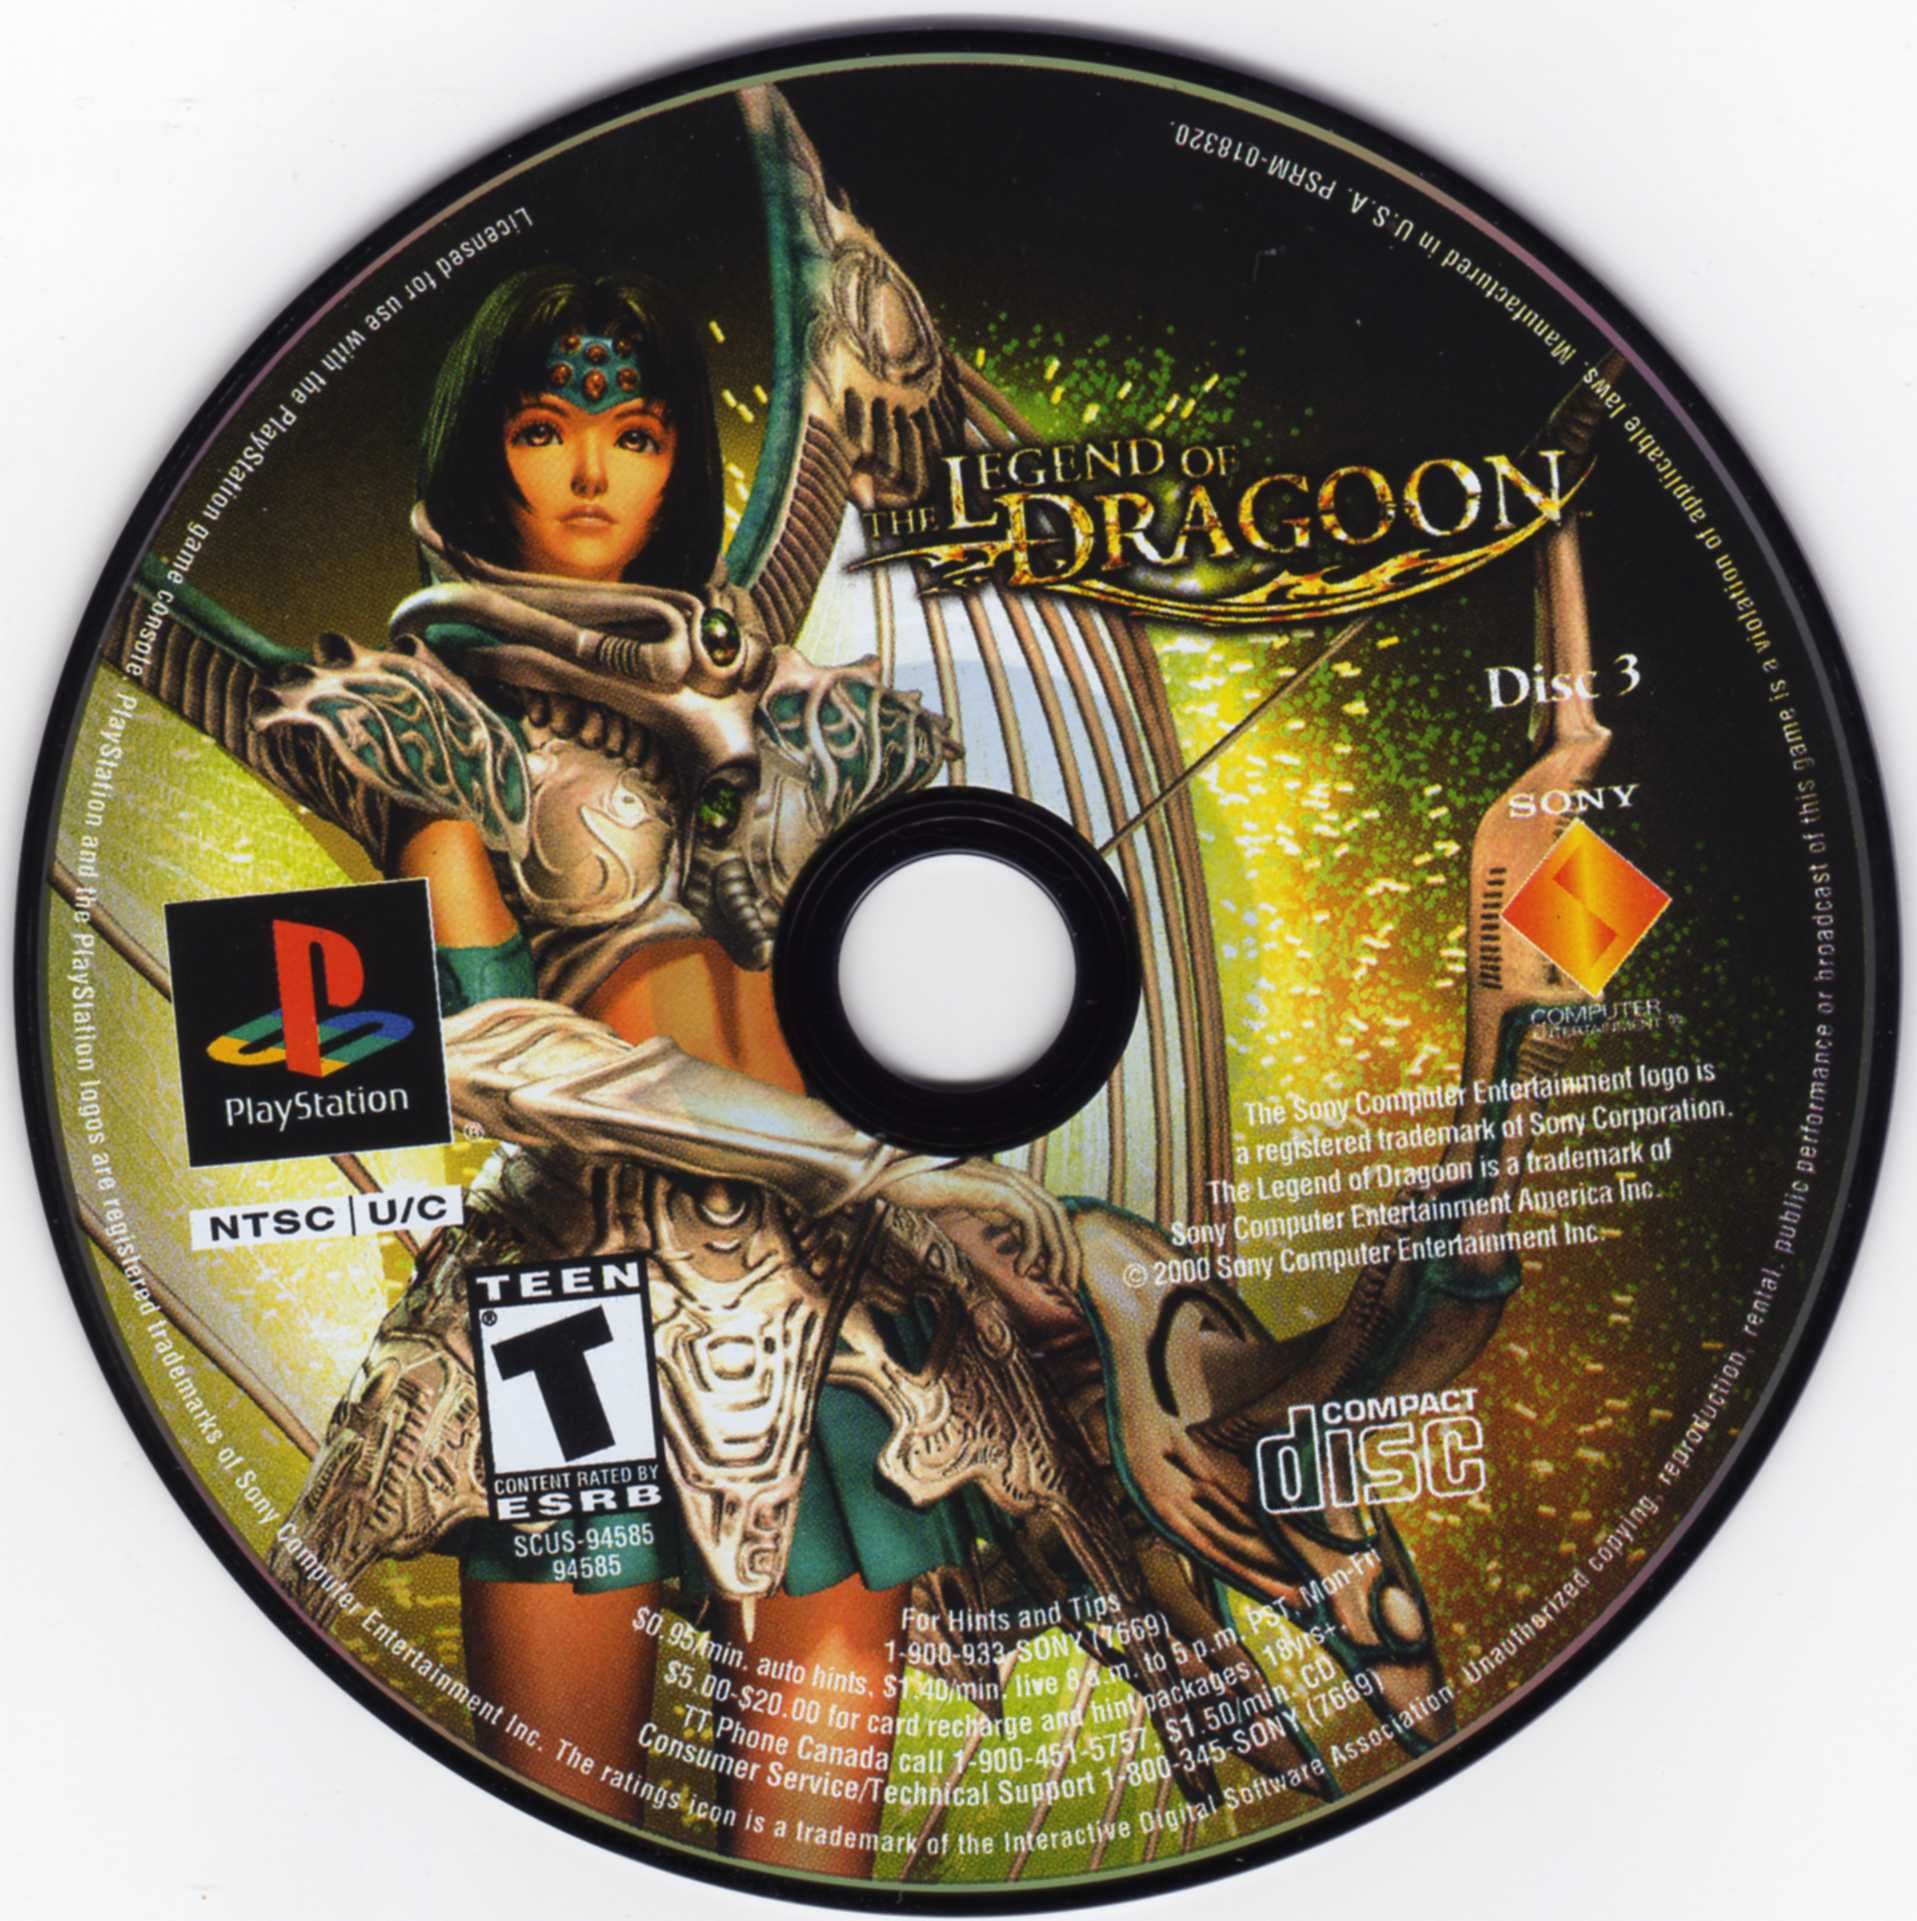 The Legend of Dragoon PSX cover